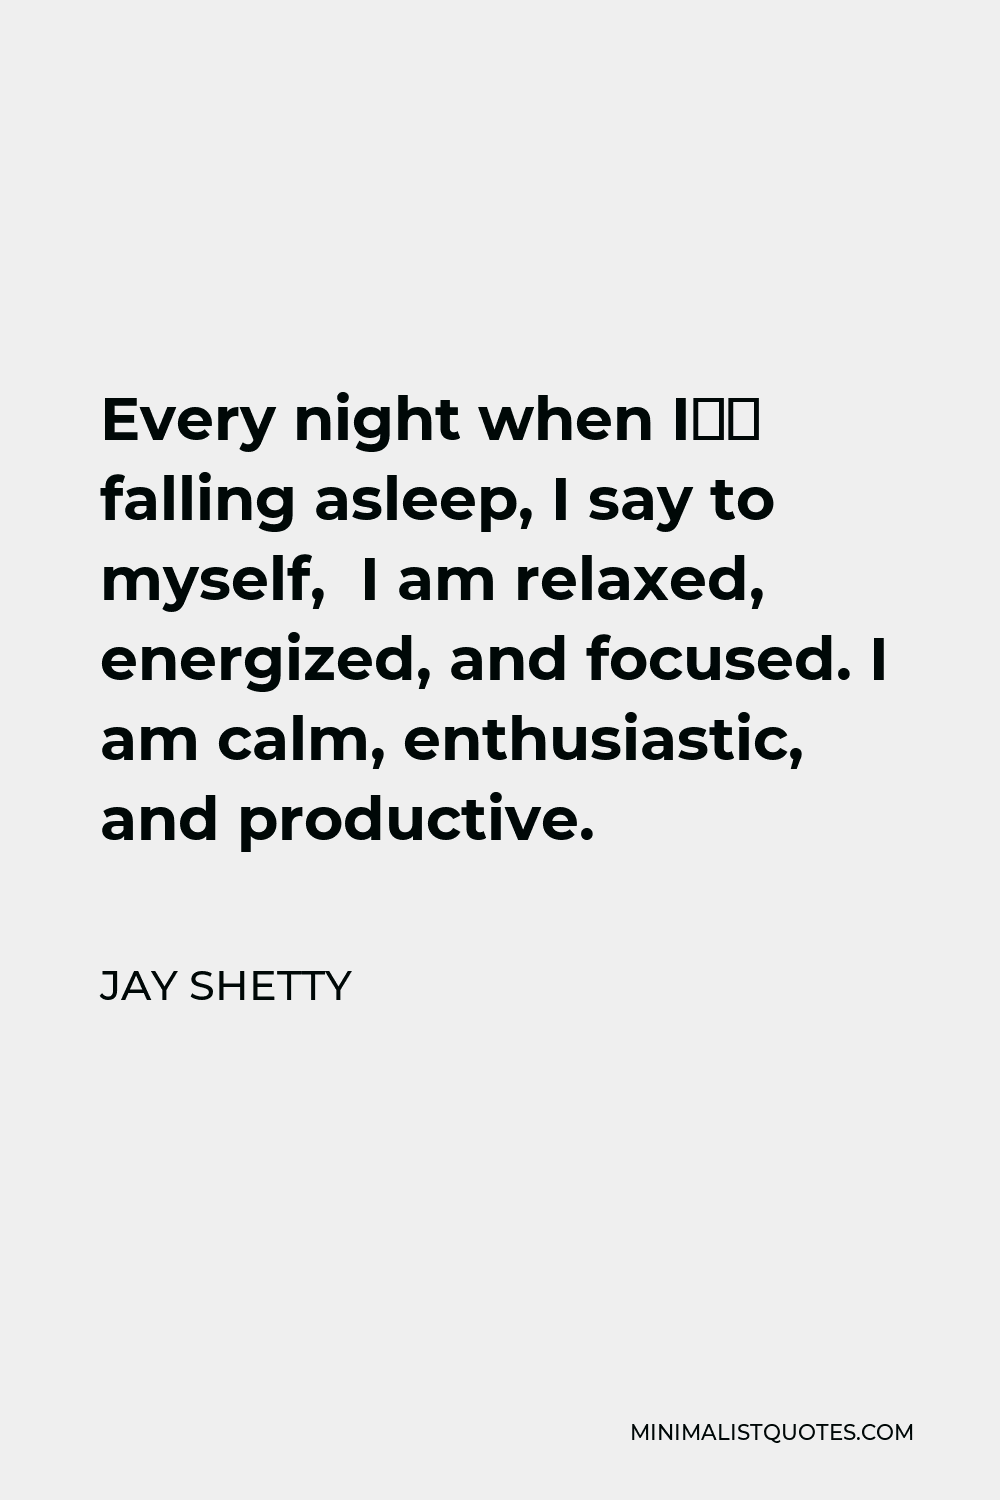 Jay Shetty Quote - Every night when I’m falling asleep, I say to myself, I am relaxed, energized, and focused. I am calm, enthusiastic, and productive.